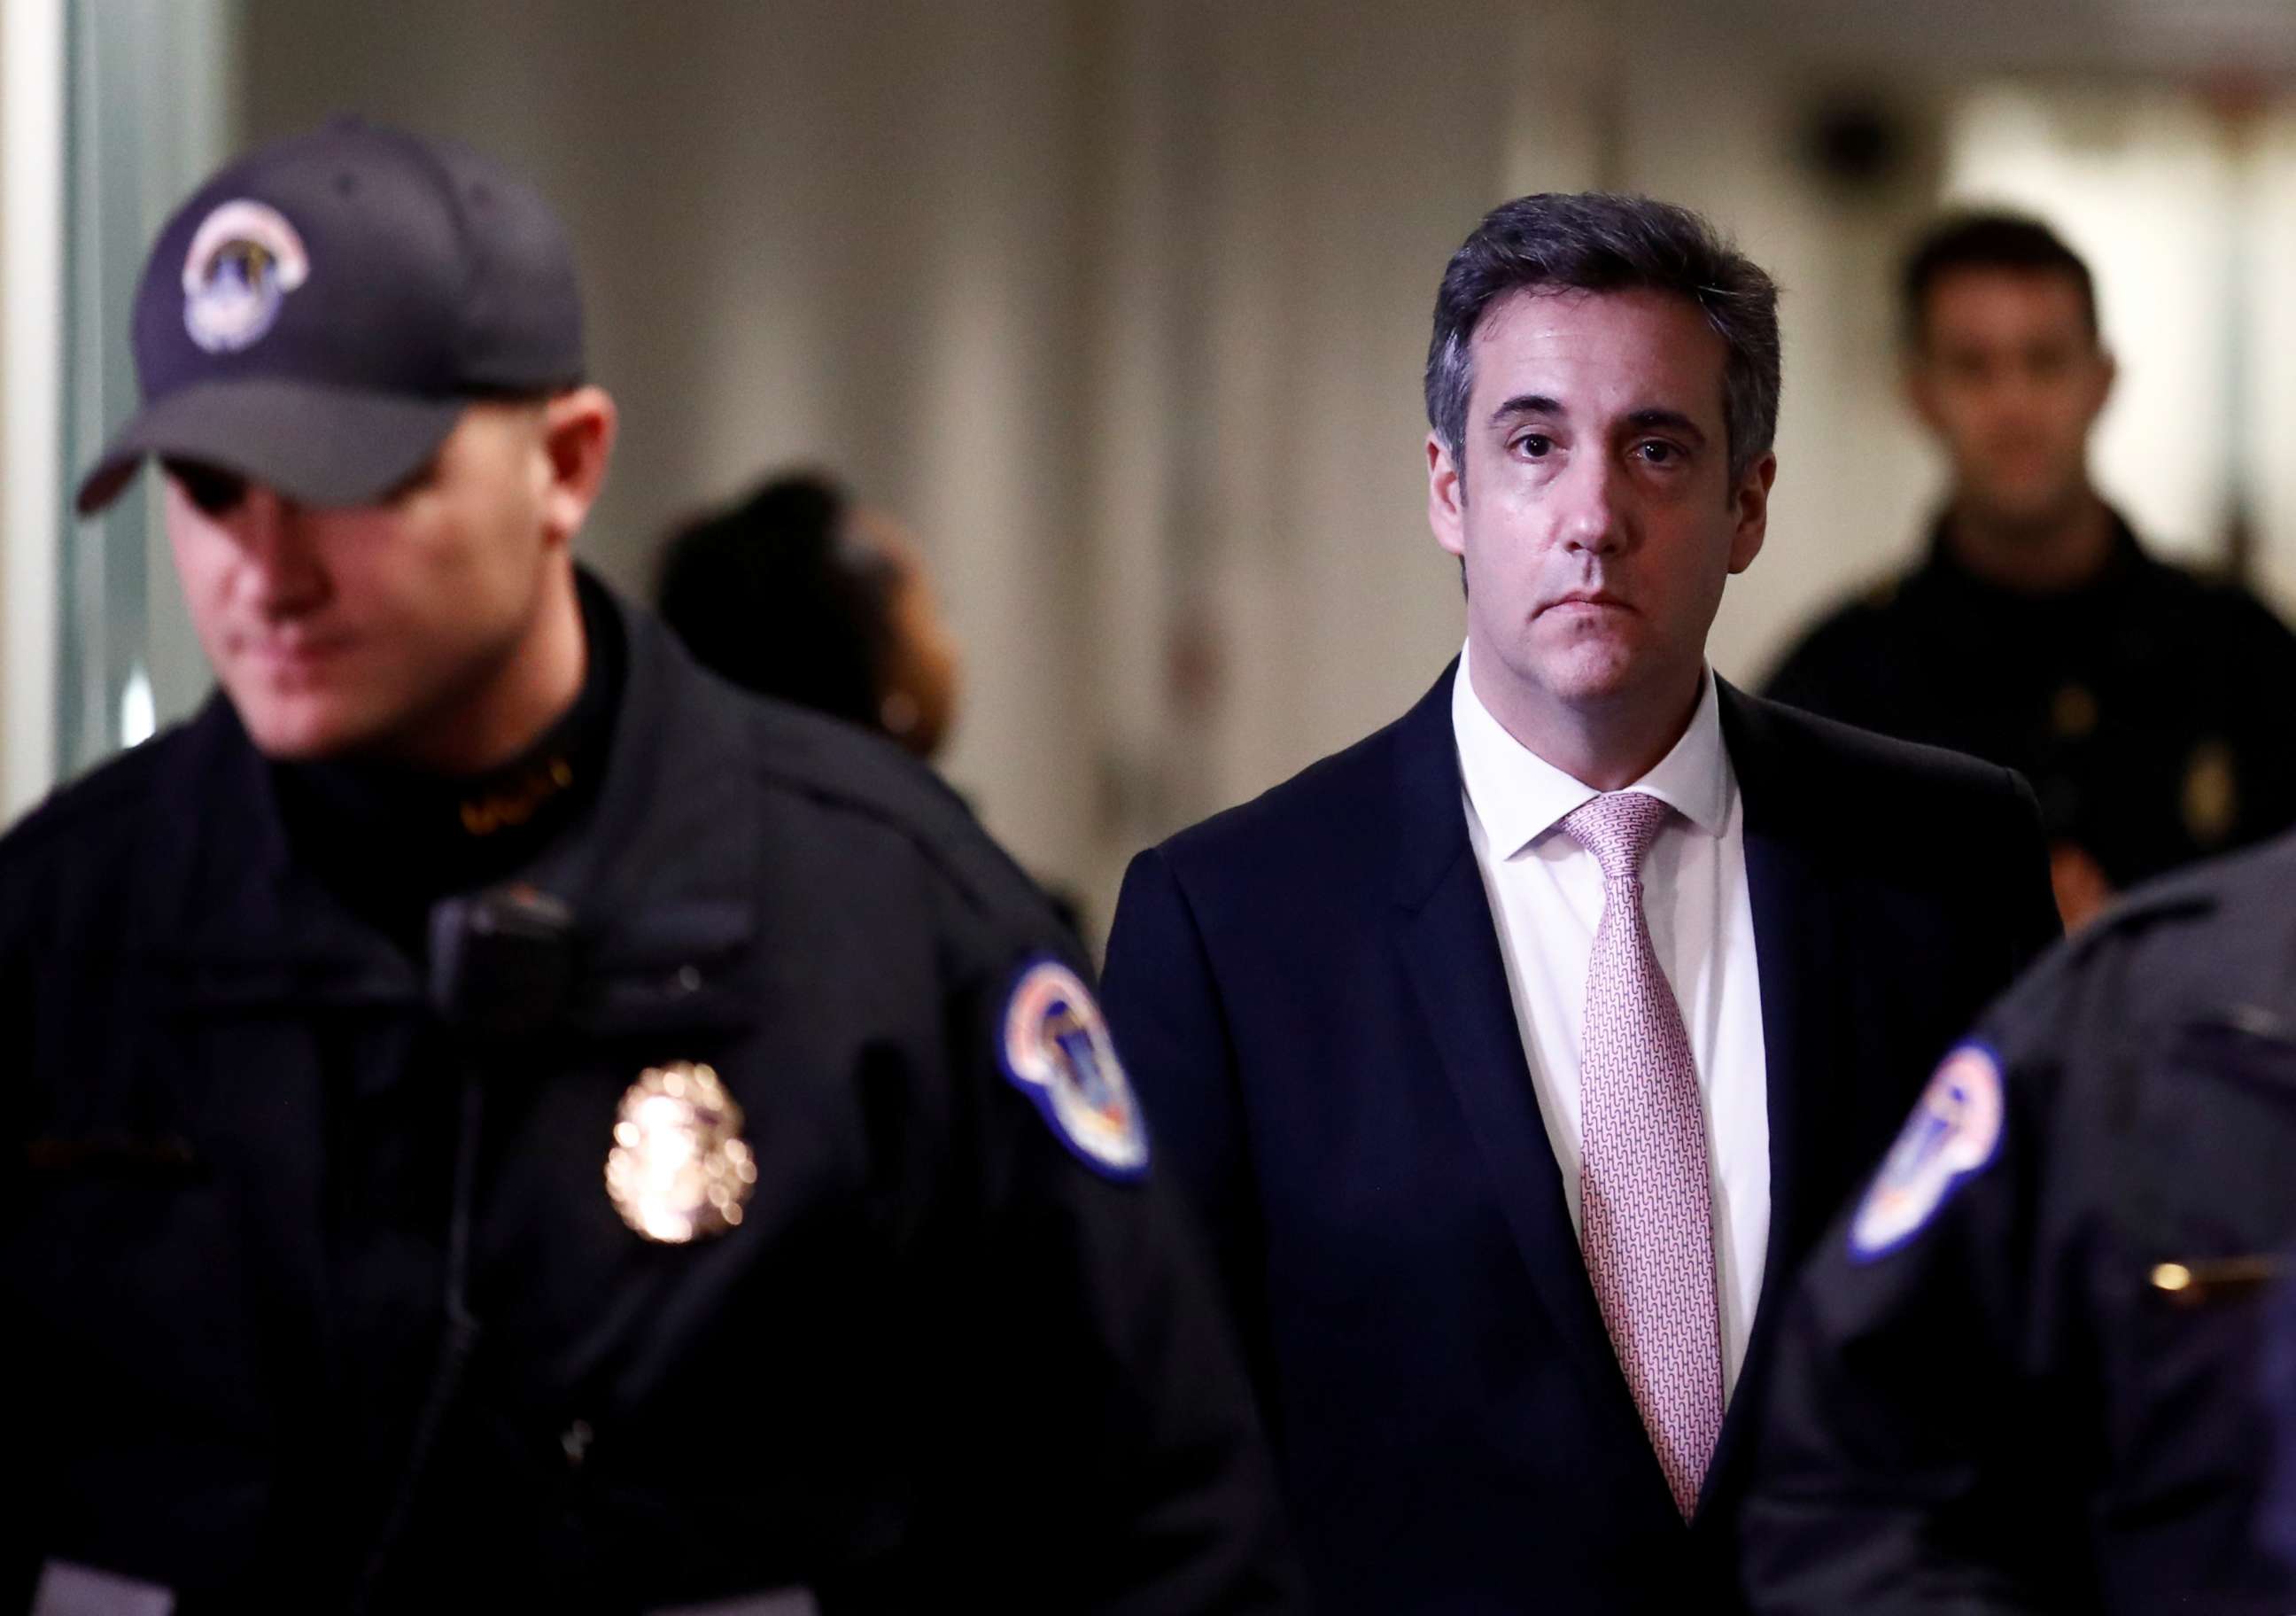 PHOTO: Former Trump personal attorney Michael Cohen departs after testifying behind closed doors before the Senate Intelligence Committee on Capitol Hill, Feb. 26, 2019.